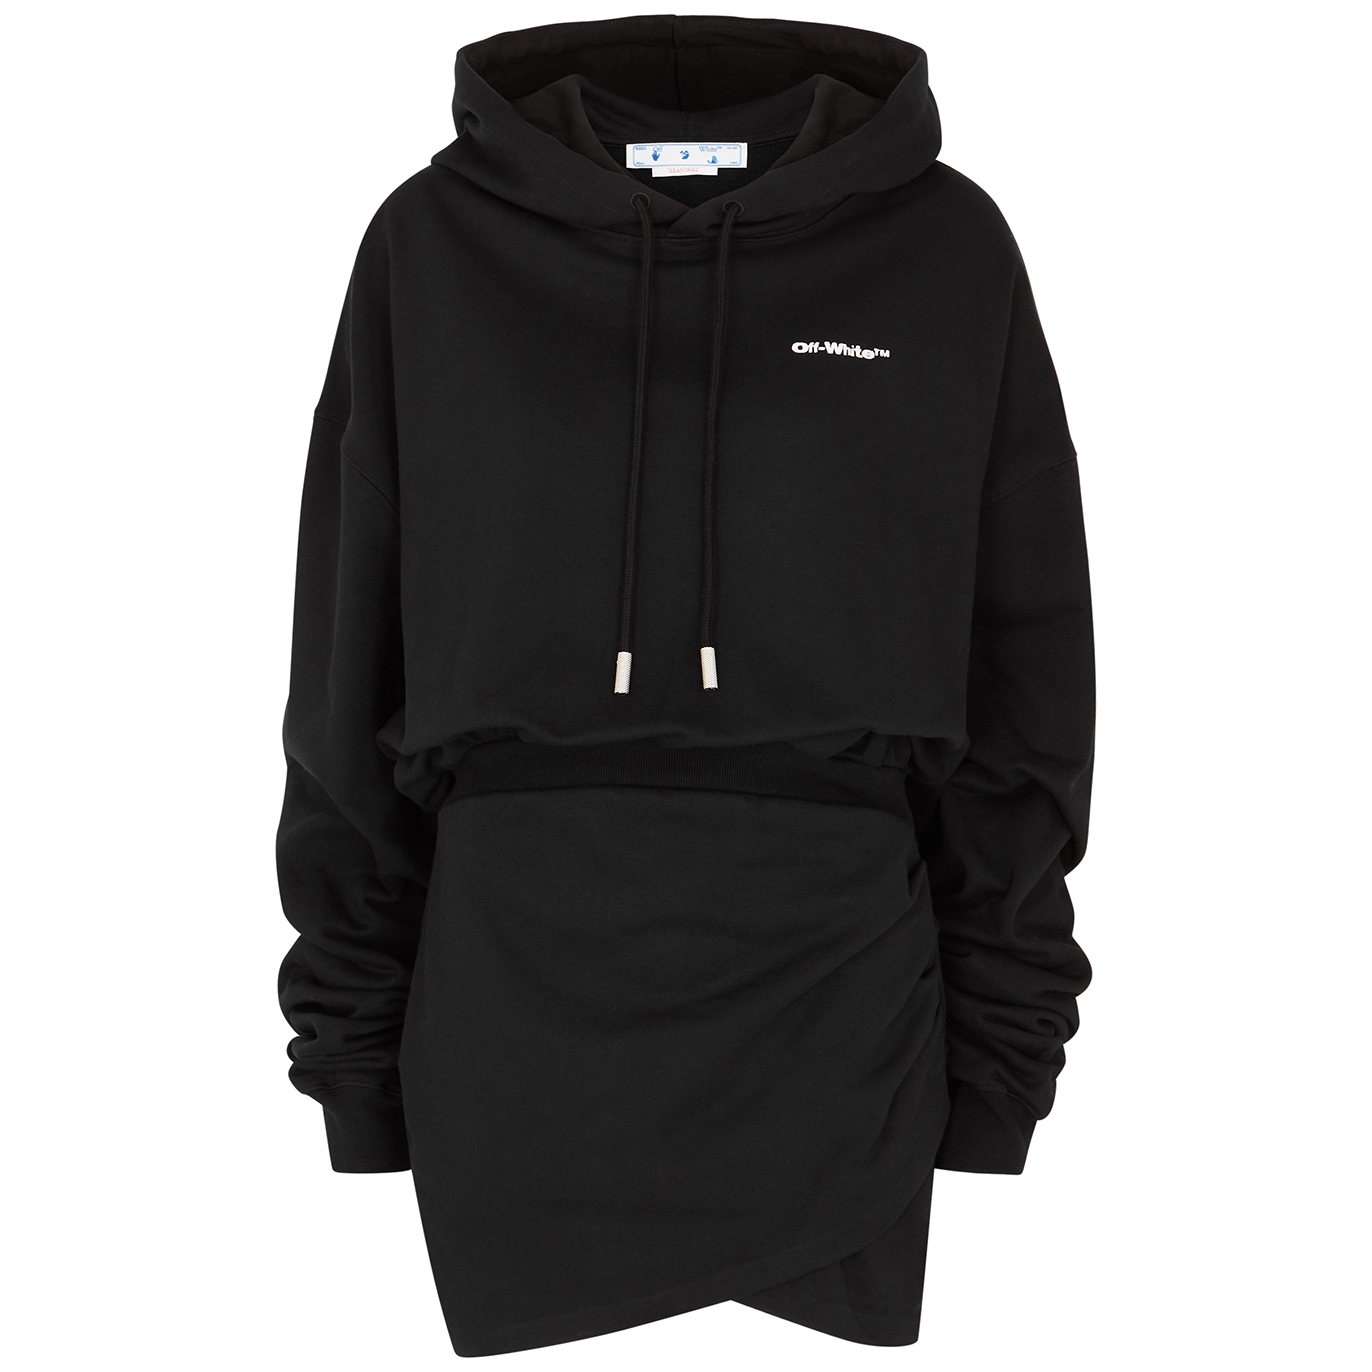 Off-White For All Hooded Cotton Sweatshirt Dress - Black And White - M